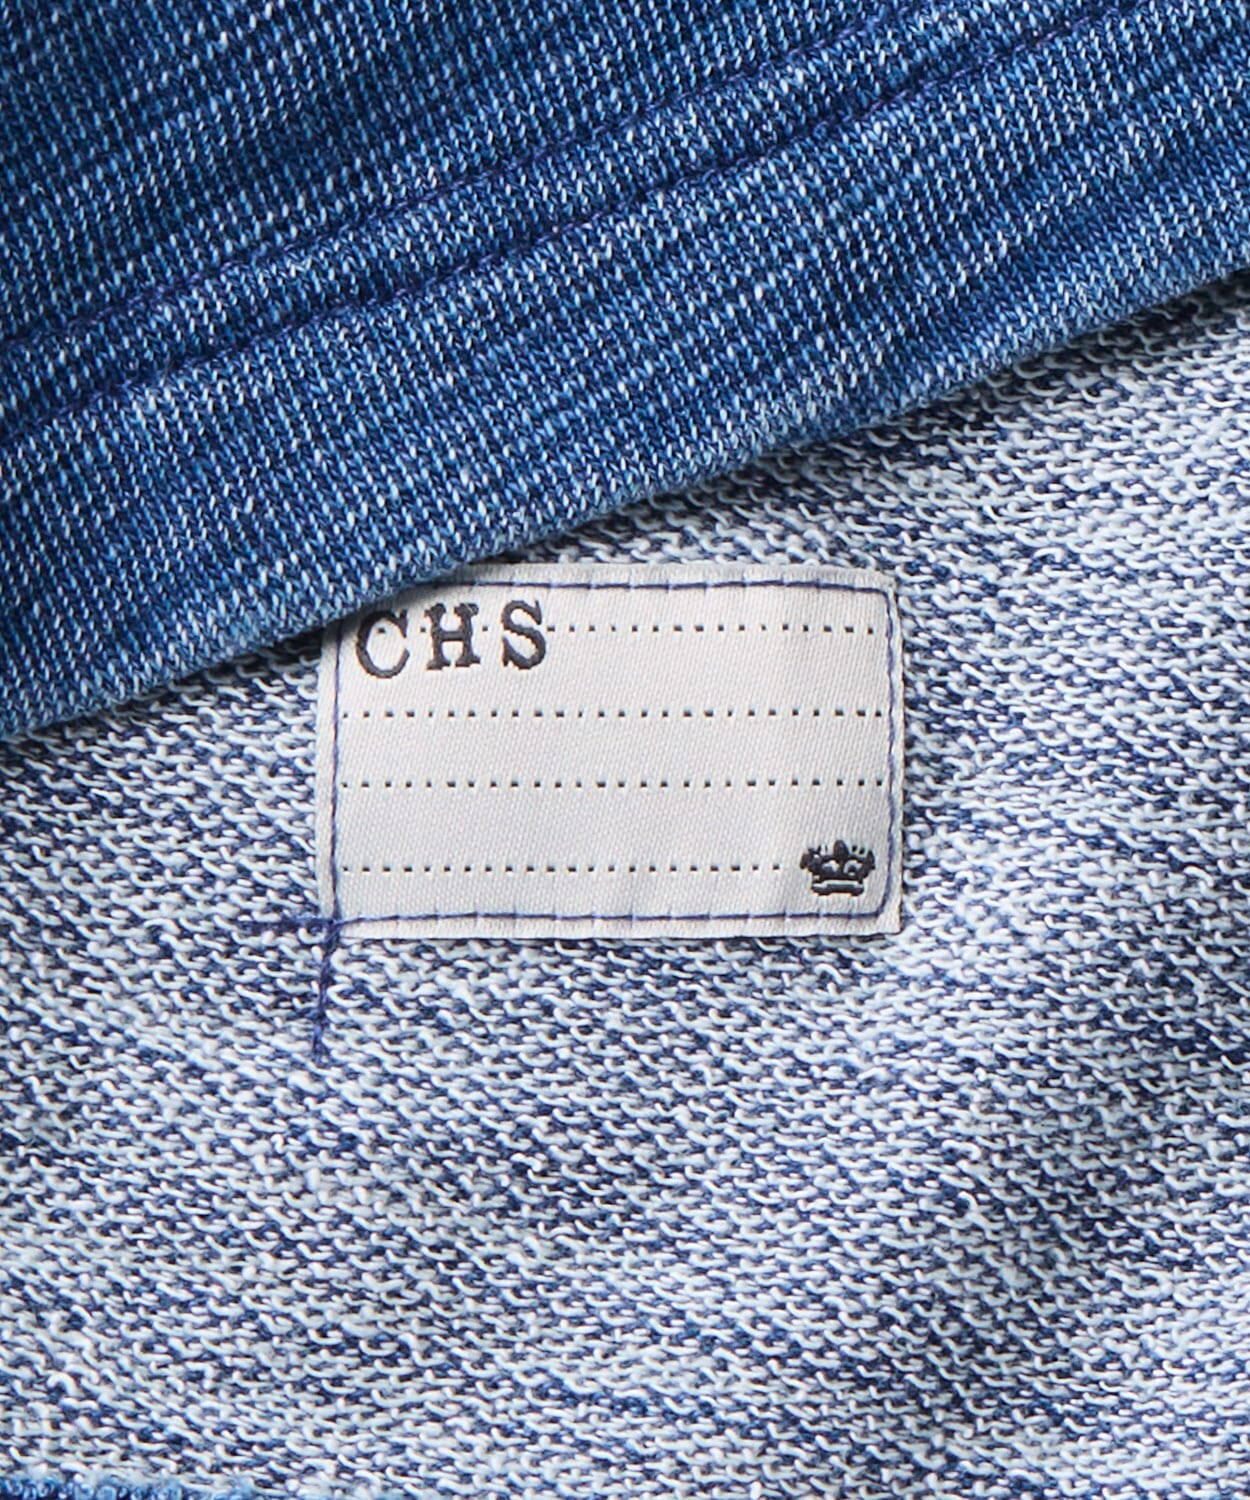 Close Up of Hidden Name Label in Interior of Garment